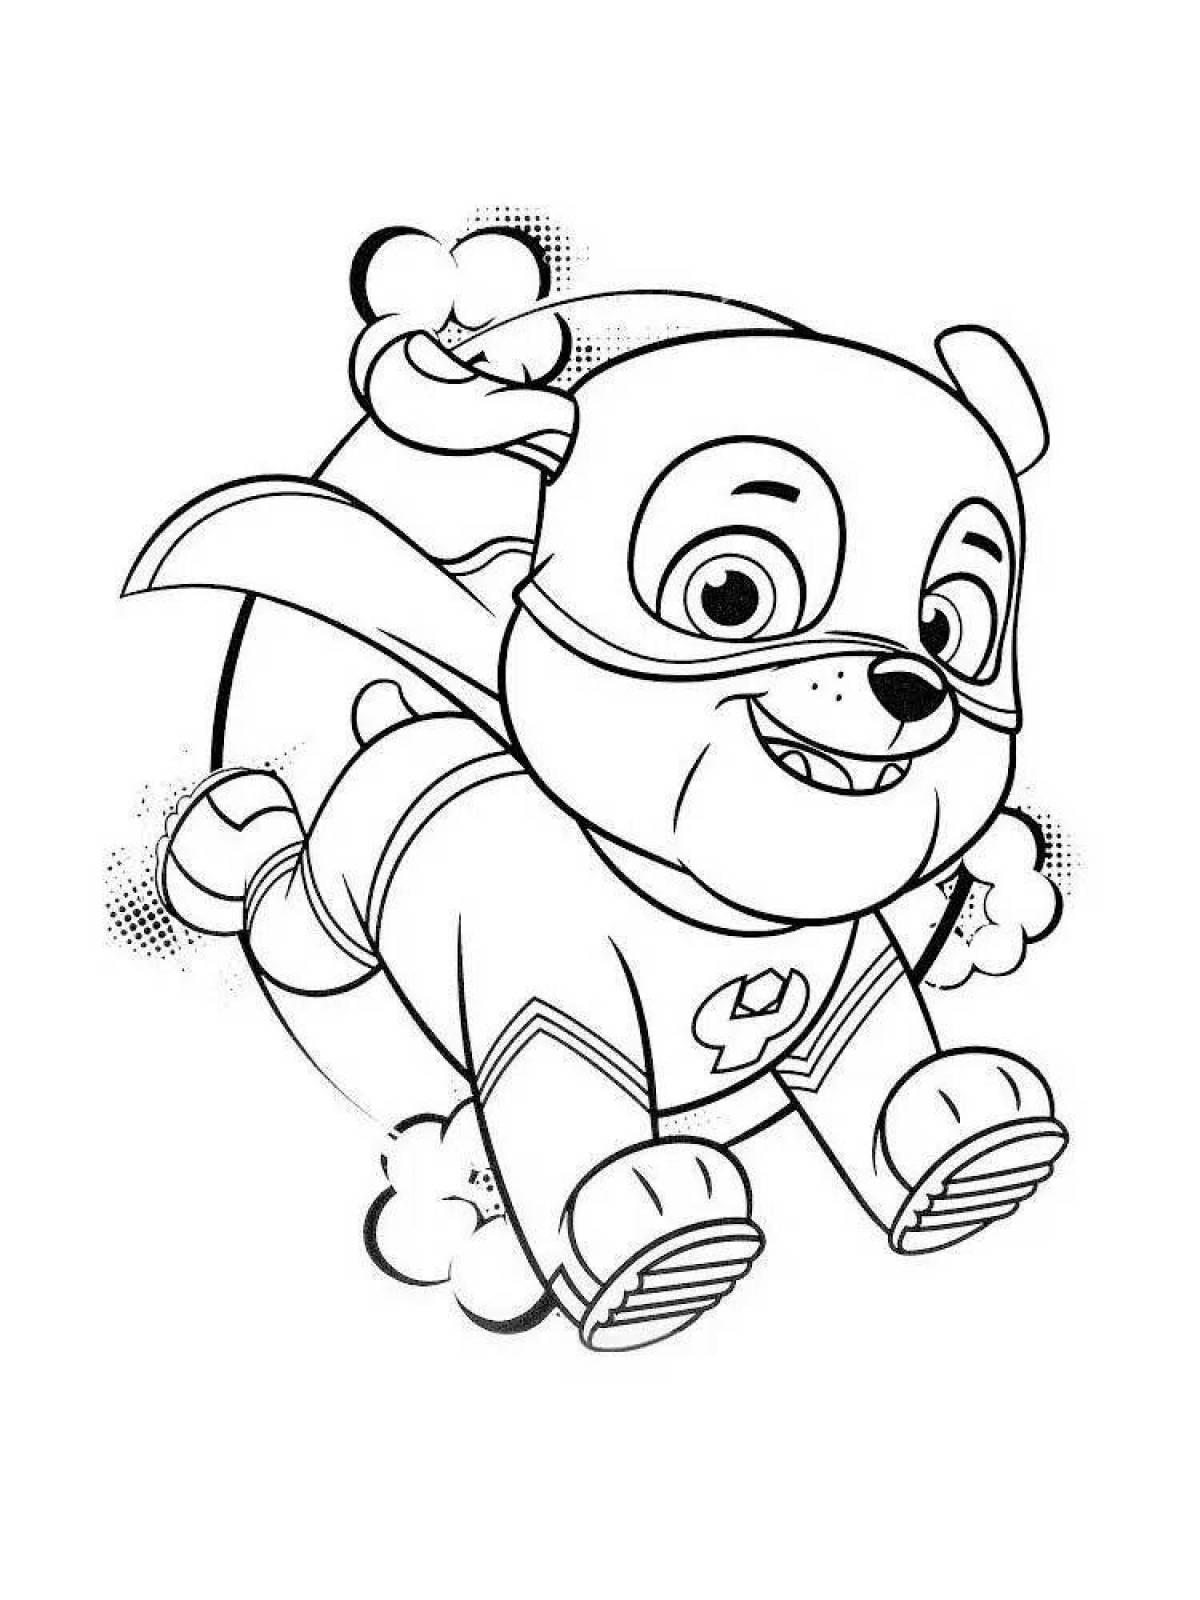 Snuggable coloring page мега щенки